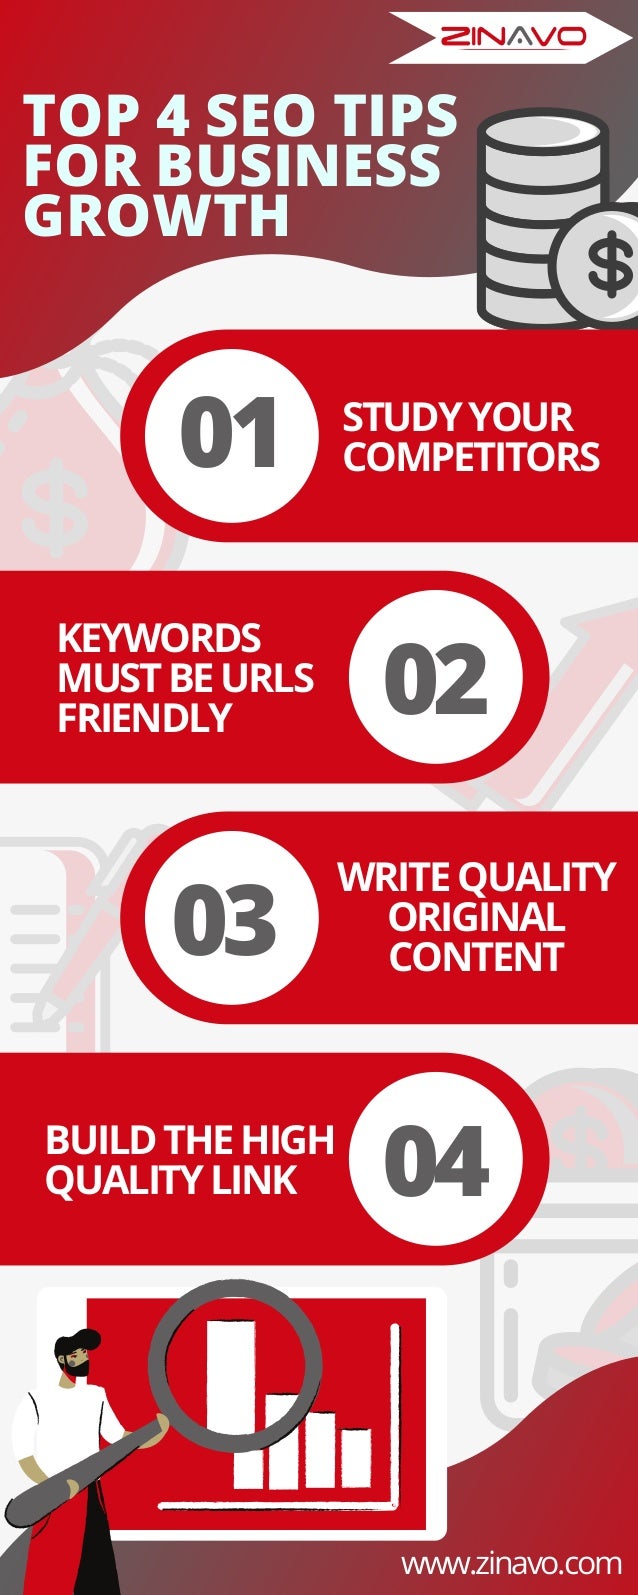 TOP 4 SEO TIPS
FOR BUSINESS
GROWTH
01
WRITEQUALITY
ORIGINAL
CONTENT
KEYWORDS
MUSTBEURLS
FRIENDLY
BUILDTHEHIGH
QUALITYLINK
STUDYYOUR
COMPETITORS
02
03
04
www.zinavo.com
 